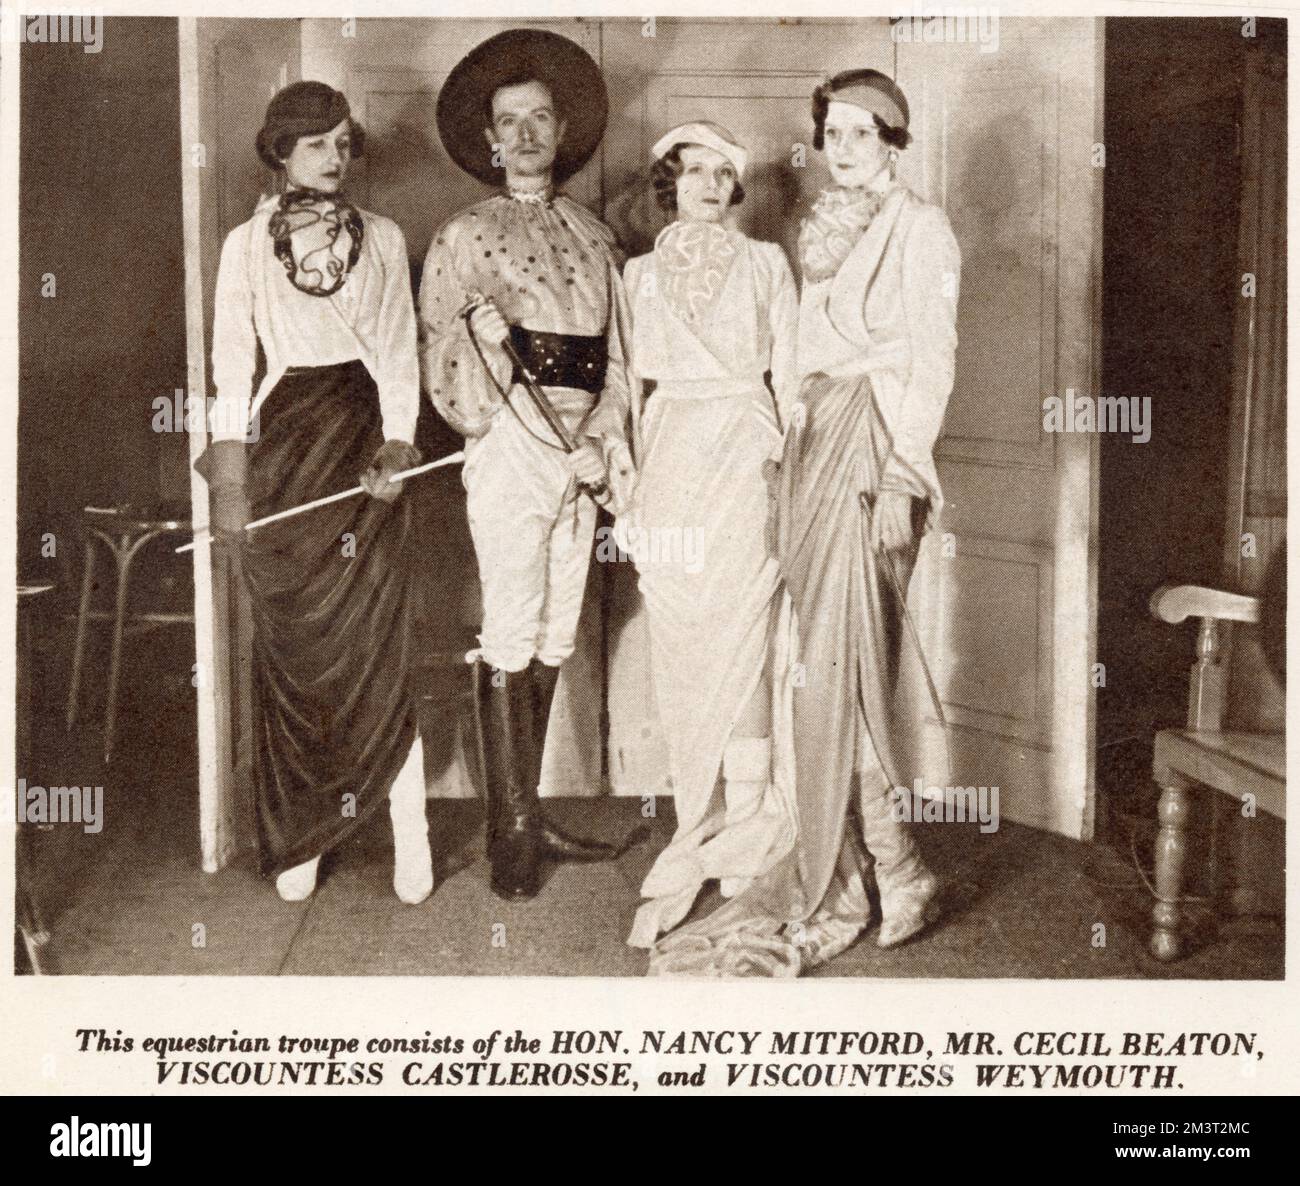 The equestrian group at the Circus Ball, Grosvenor House, 1933. From left, Nancy Mitford, Cecil Beaton, Lady Castlerosse and Viscountess Weymouth. Stock Photo